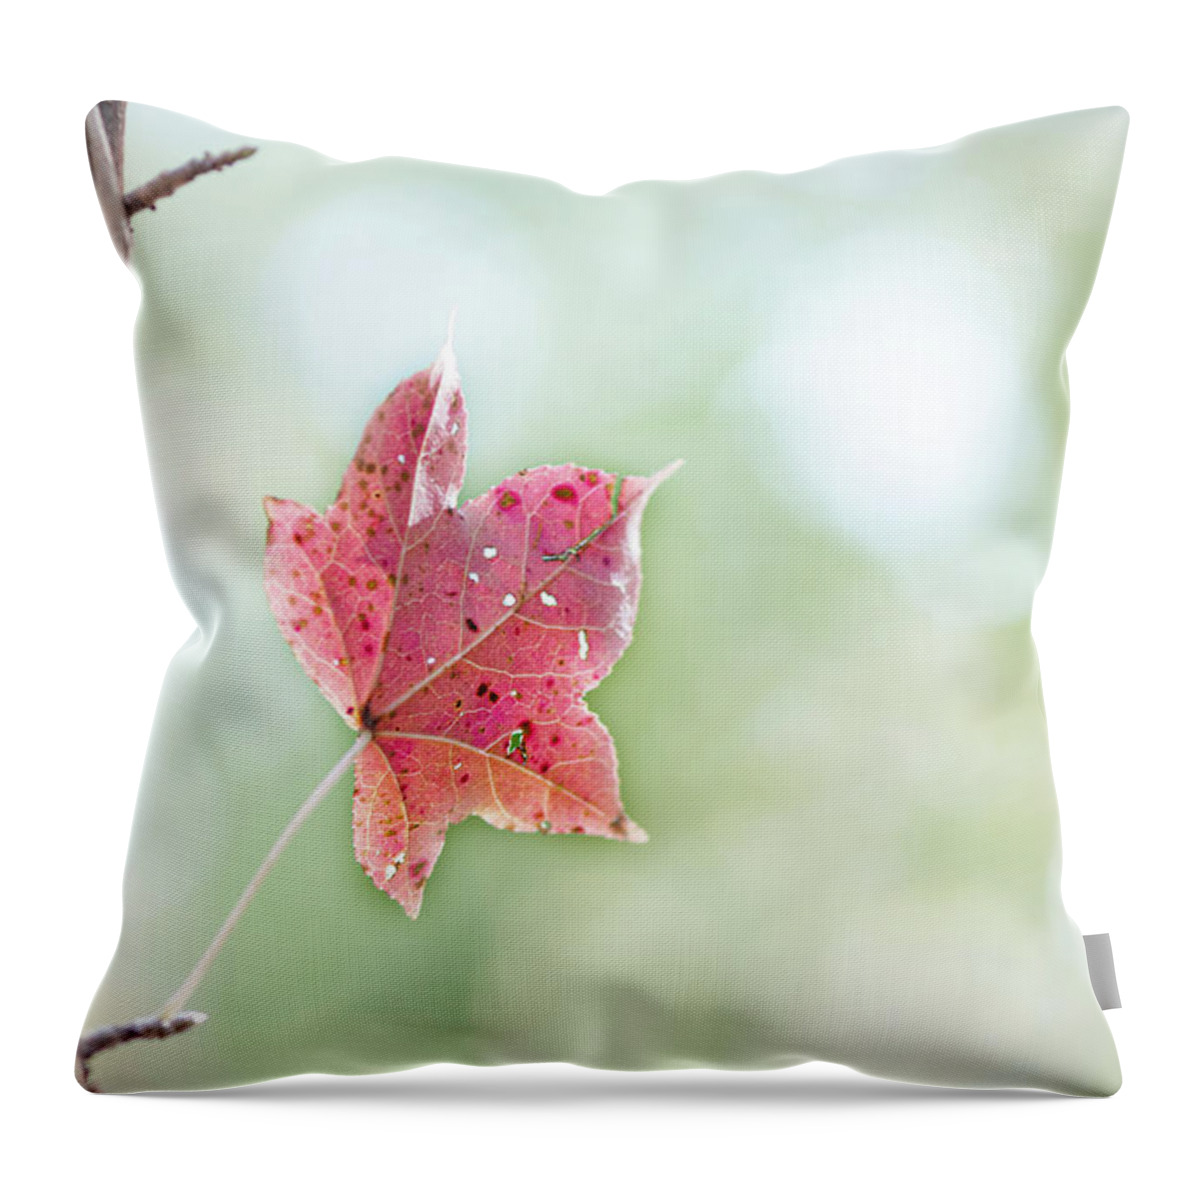 Fall Throw Pillow featuring the photograph Autumn Leaf by Karen Rispin